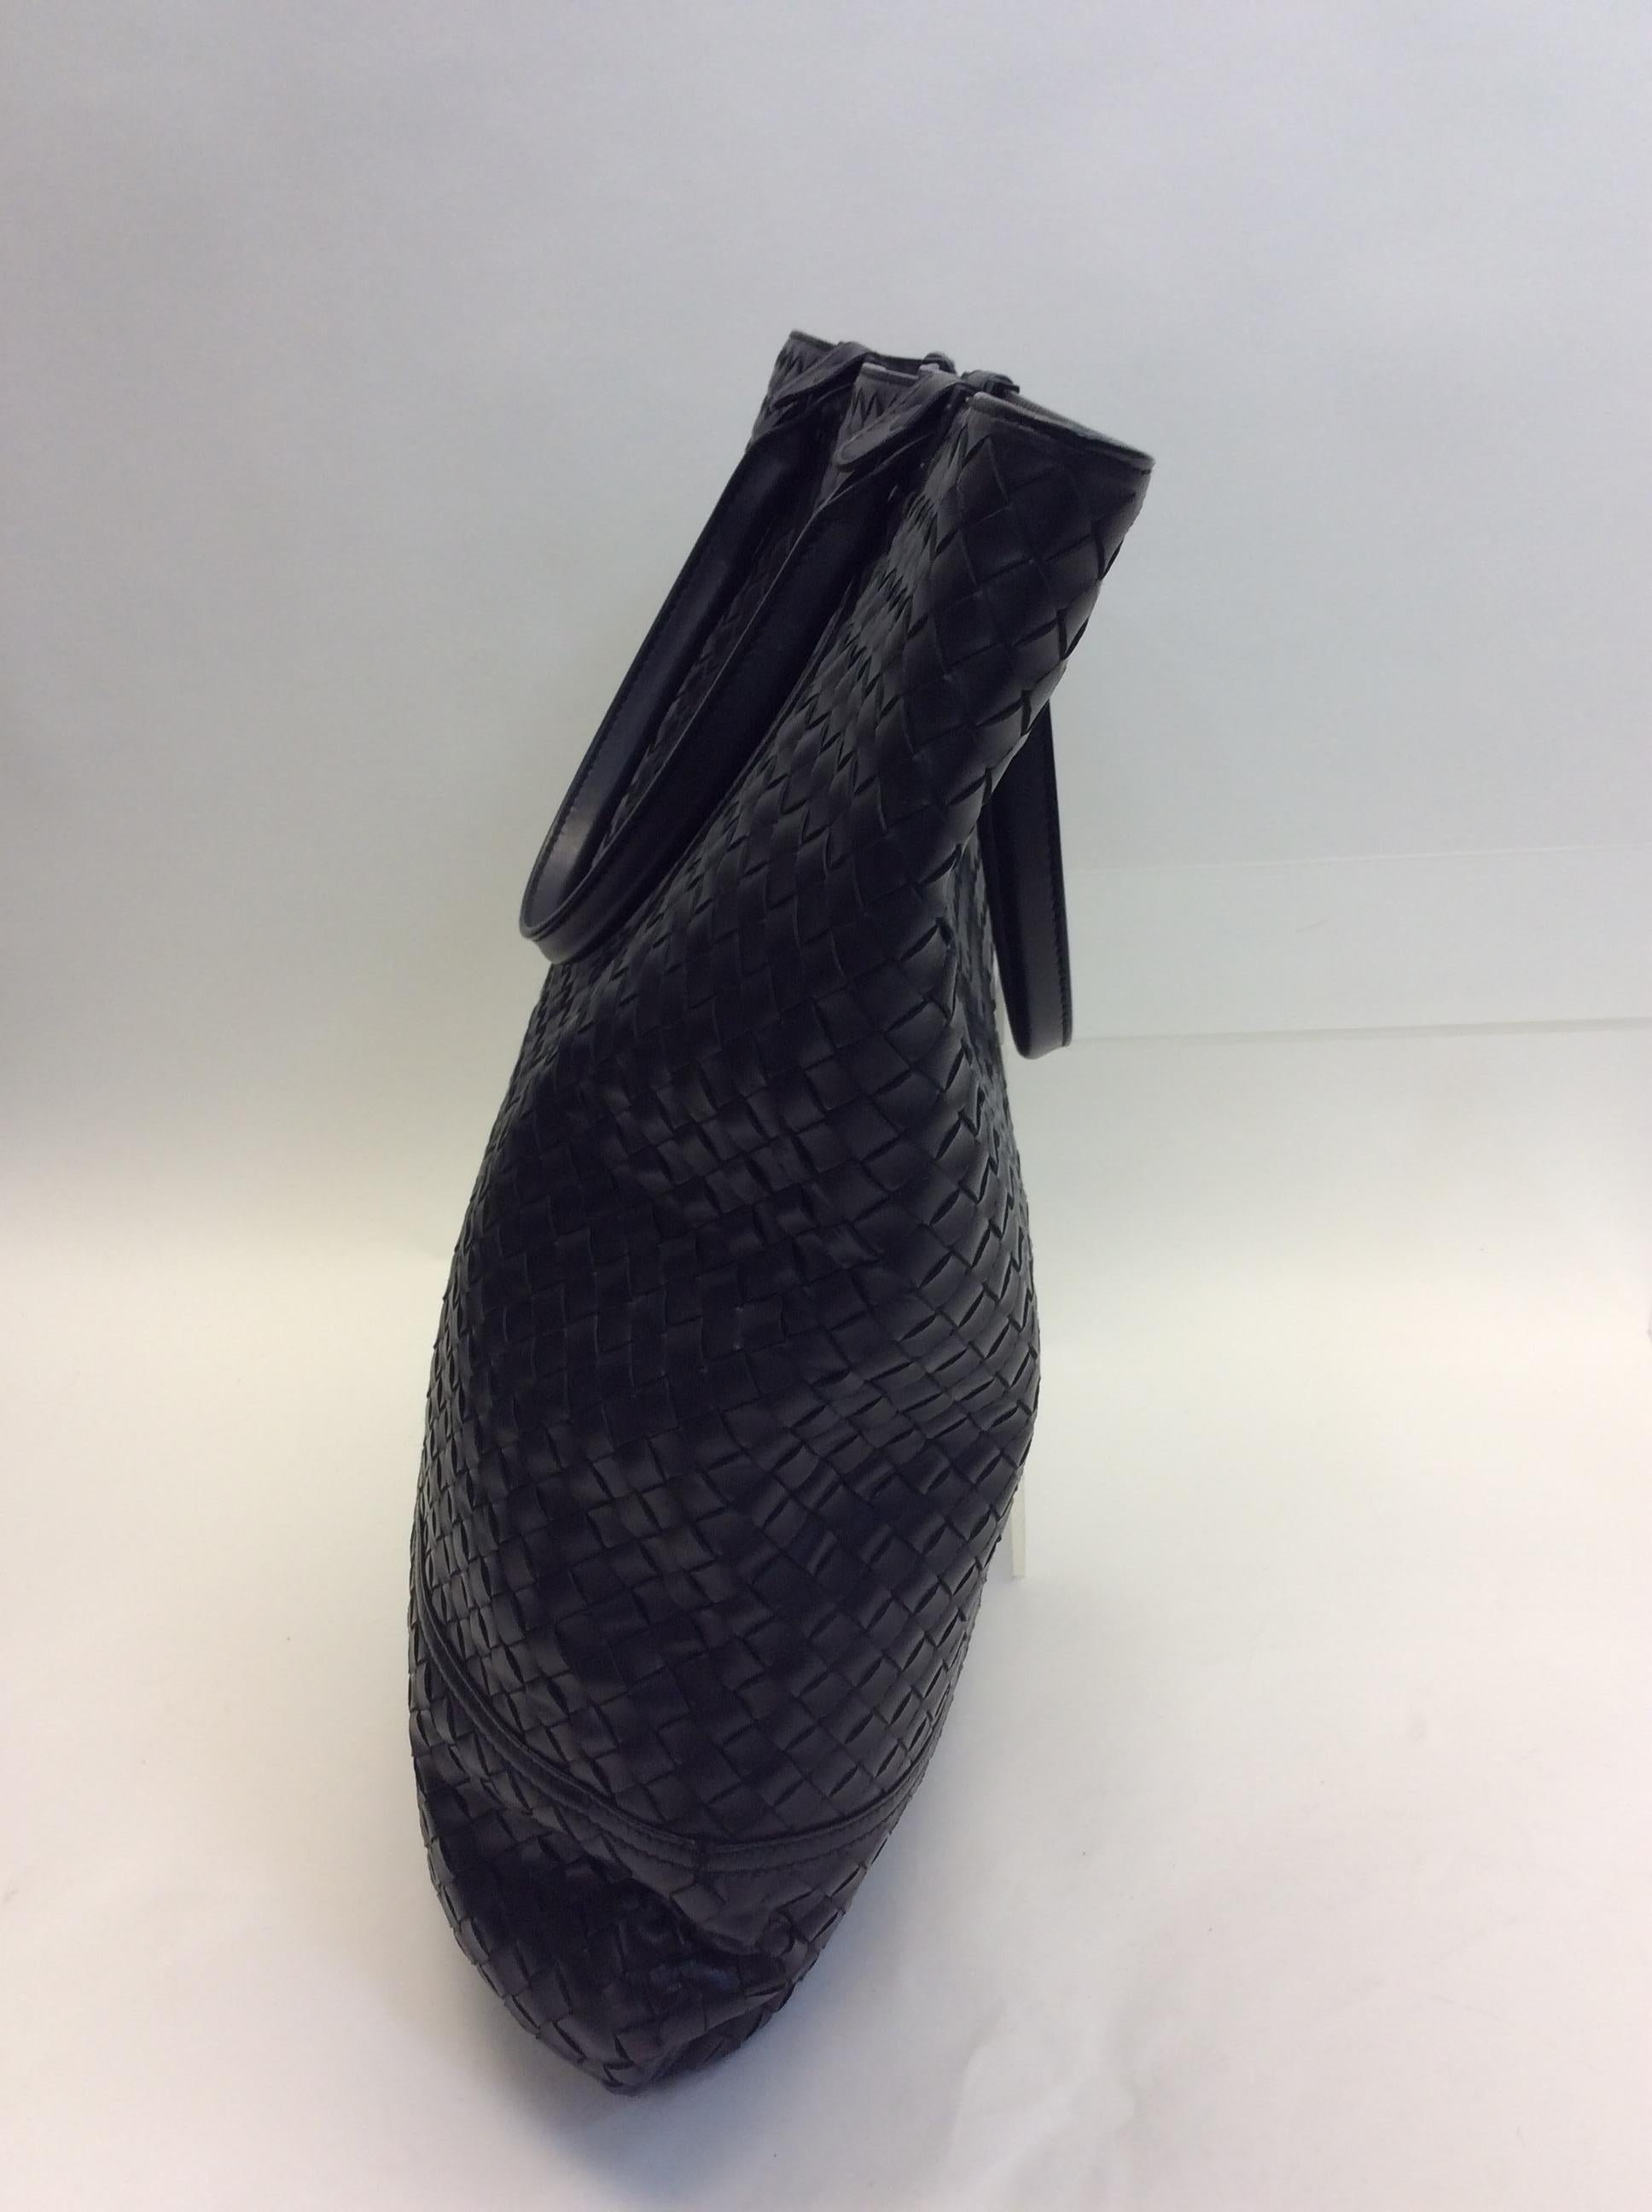 Bottega Large Black Leather Woven Tote
$1899
Made in Italy
Leather
17